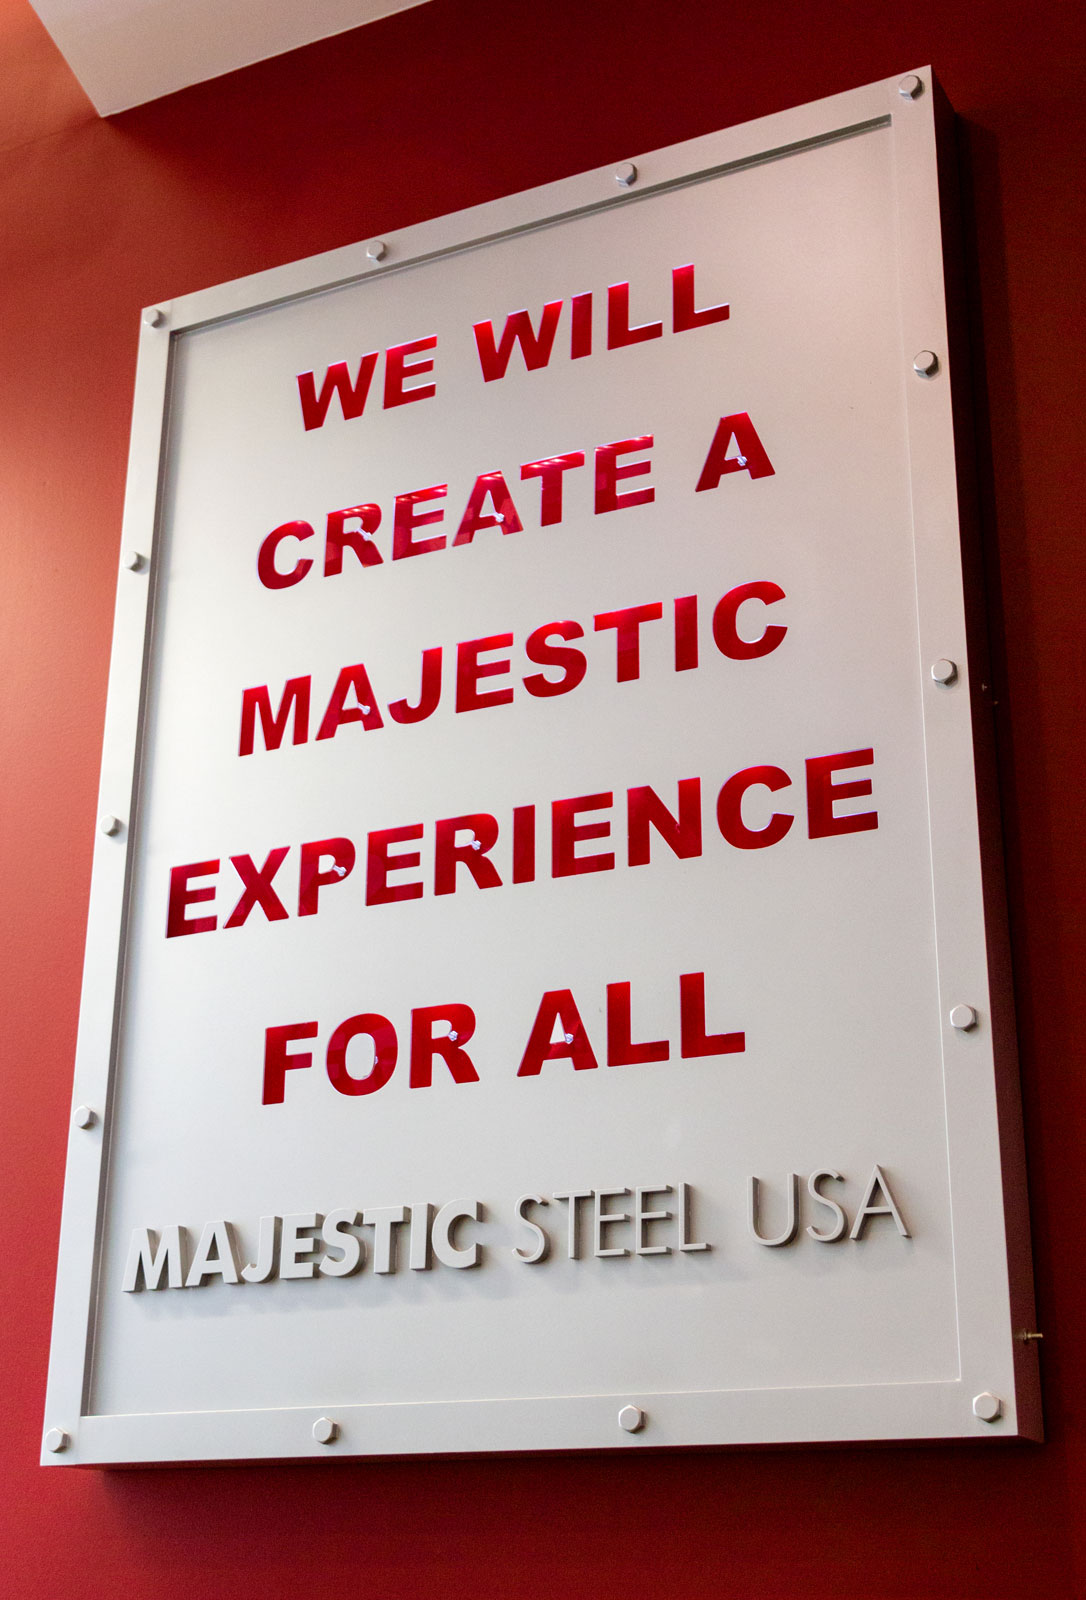 colored image of a sign in the majestic steel office that reads "We will create a majestic experience for all."